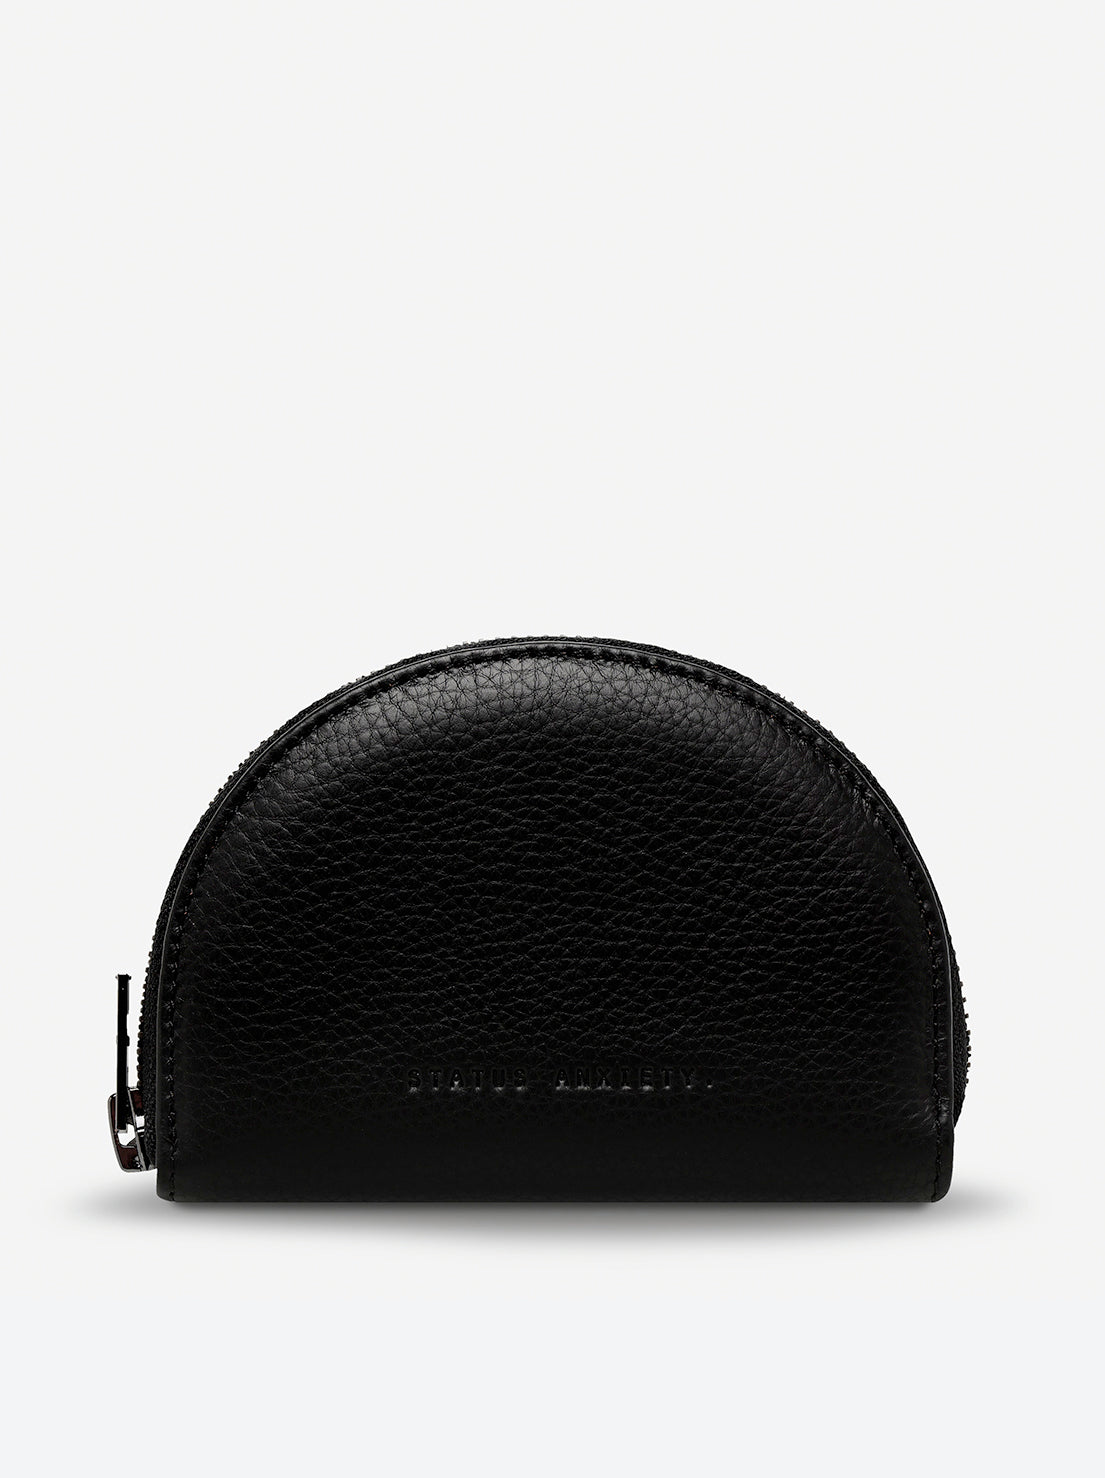 Left Behind Black Leather Pouch | Status Anxiety®